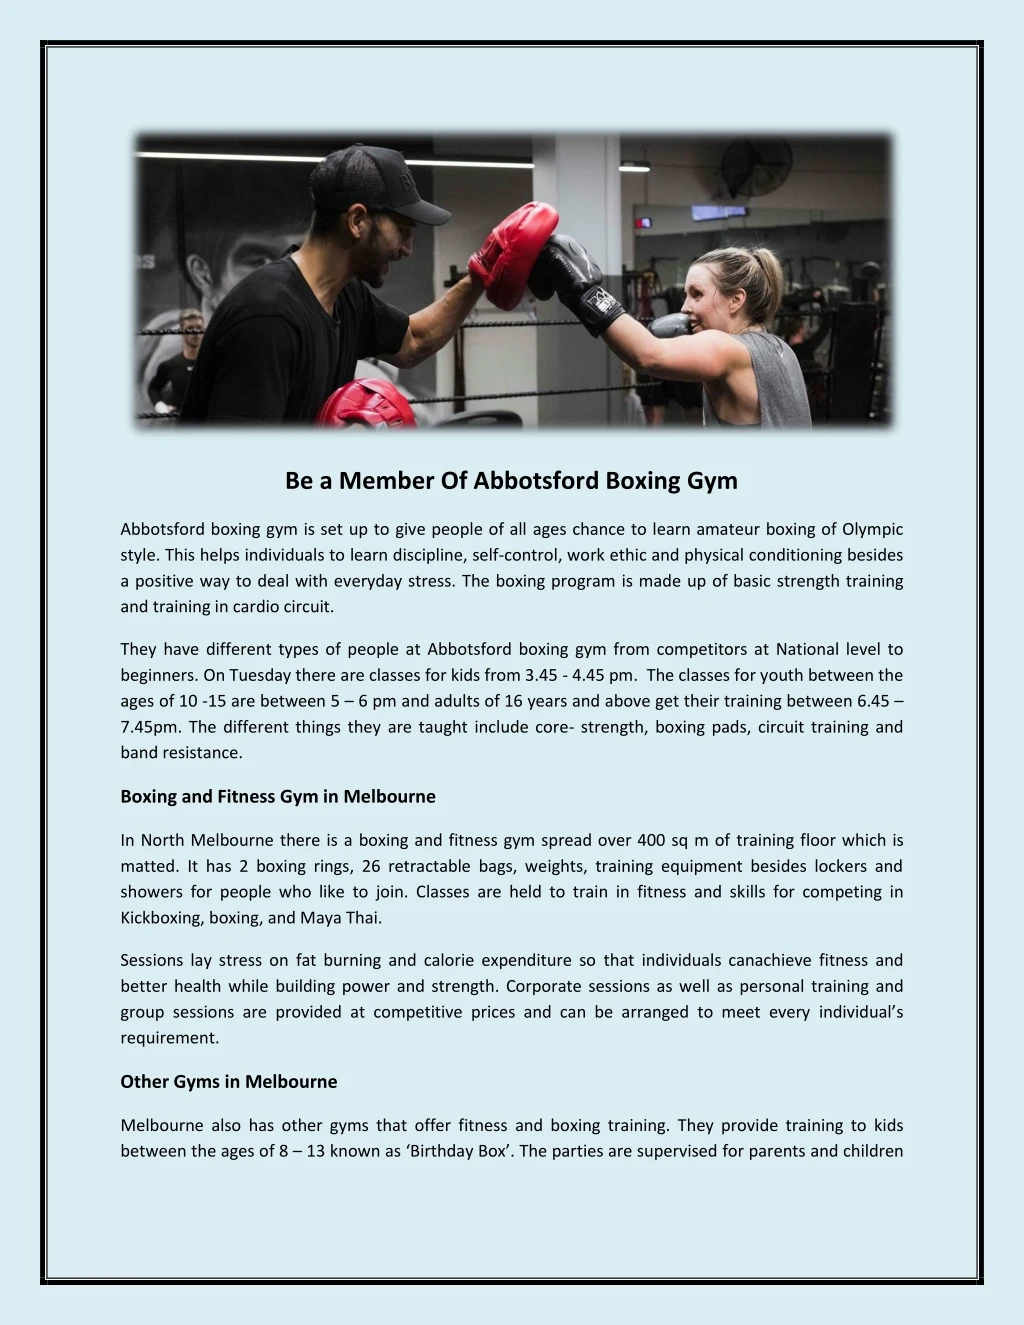 be a member of abbotsford boxing gym